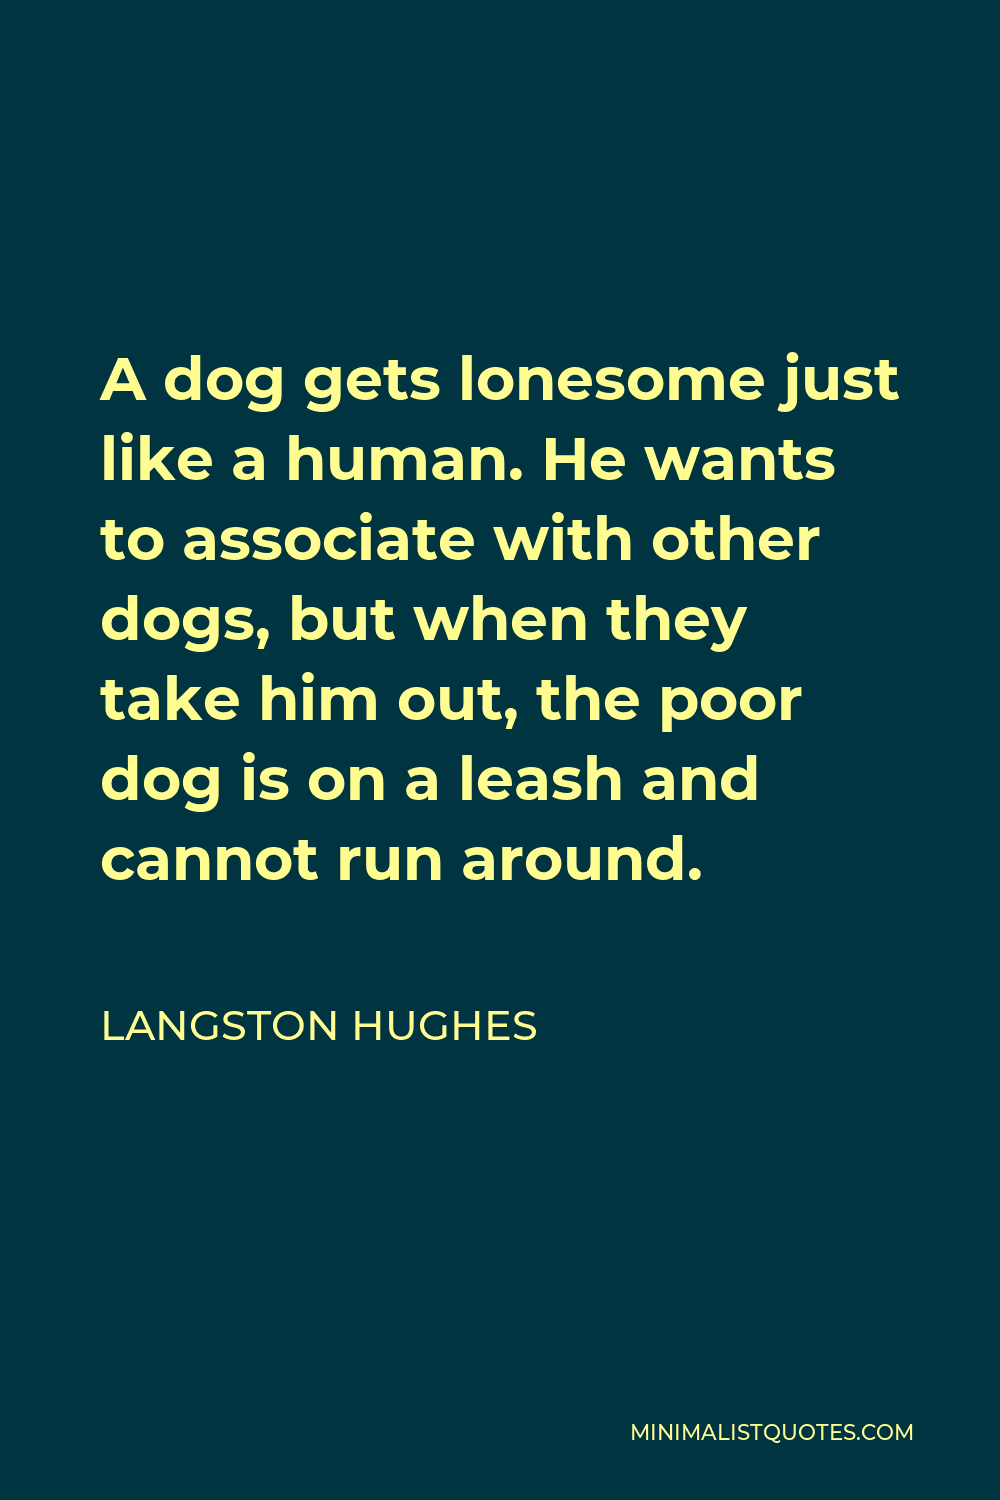 Langston Hughes Quote - A dog gets lonesome just like a human. He wants to associate with other dogs, but when they take him out, the poor dog is on a leash and cannot run around.